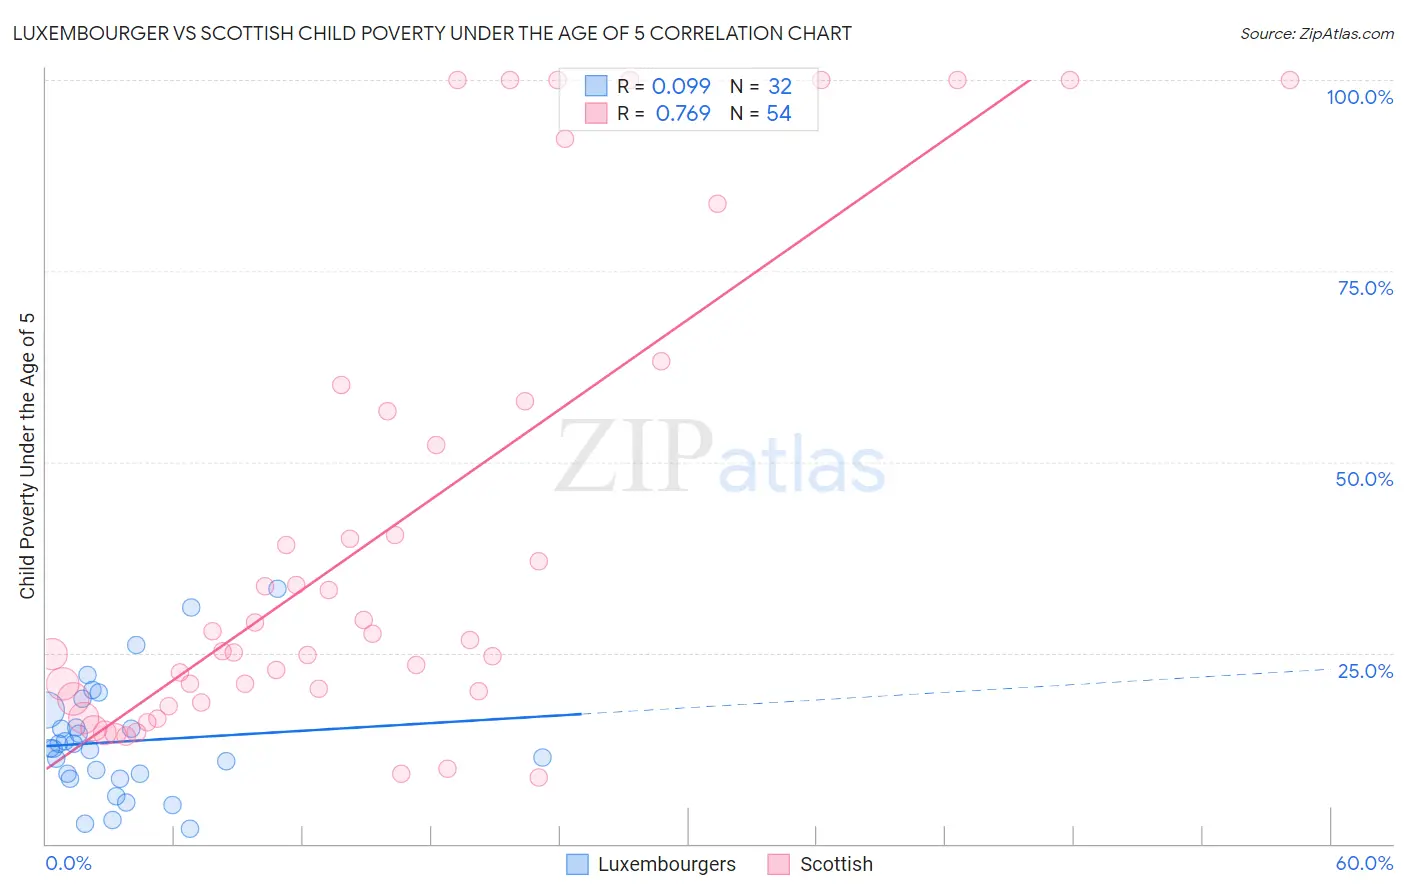 Luxembourger vs Scottish Child Poverty Under the Age of 5